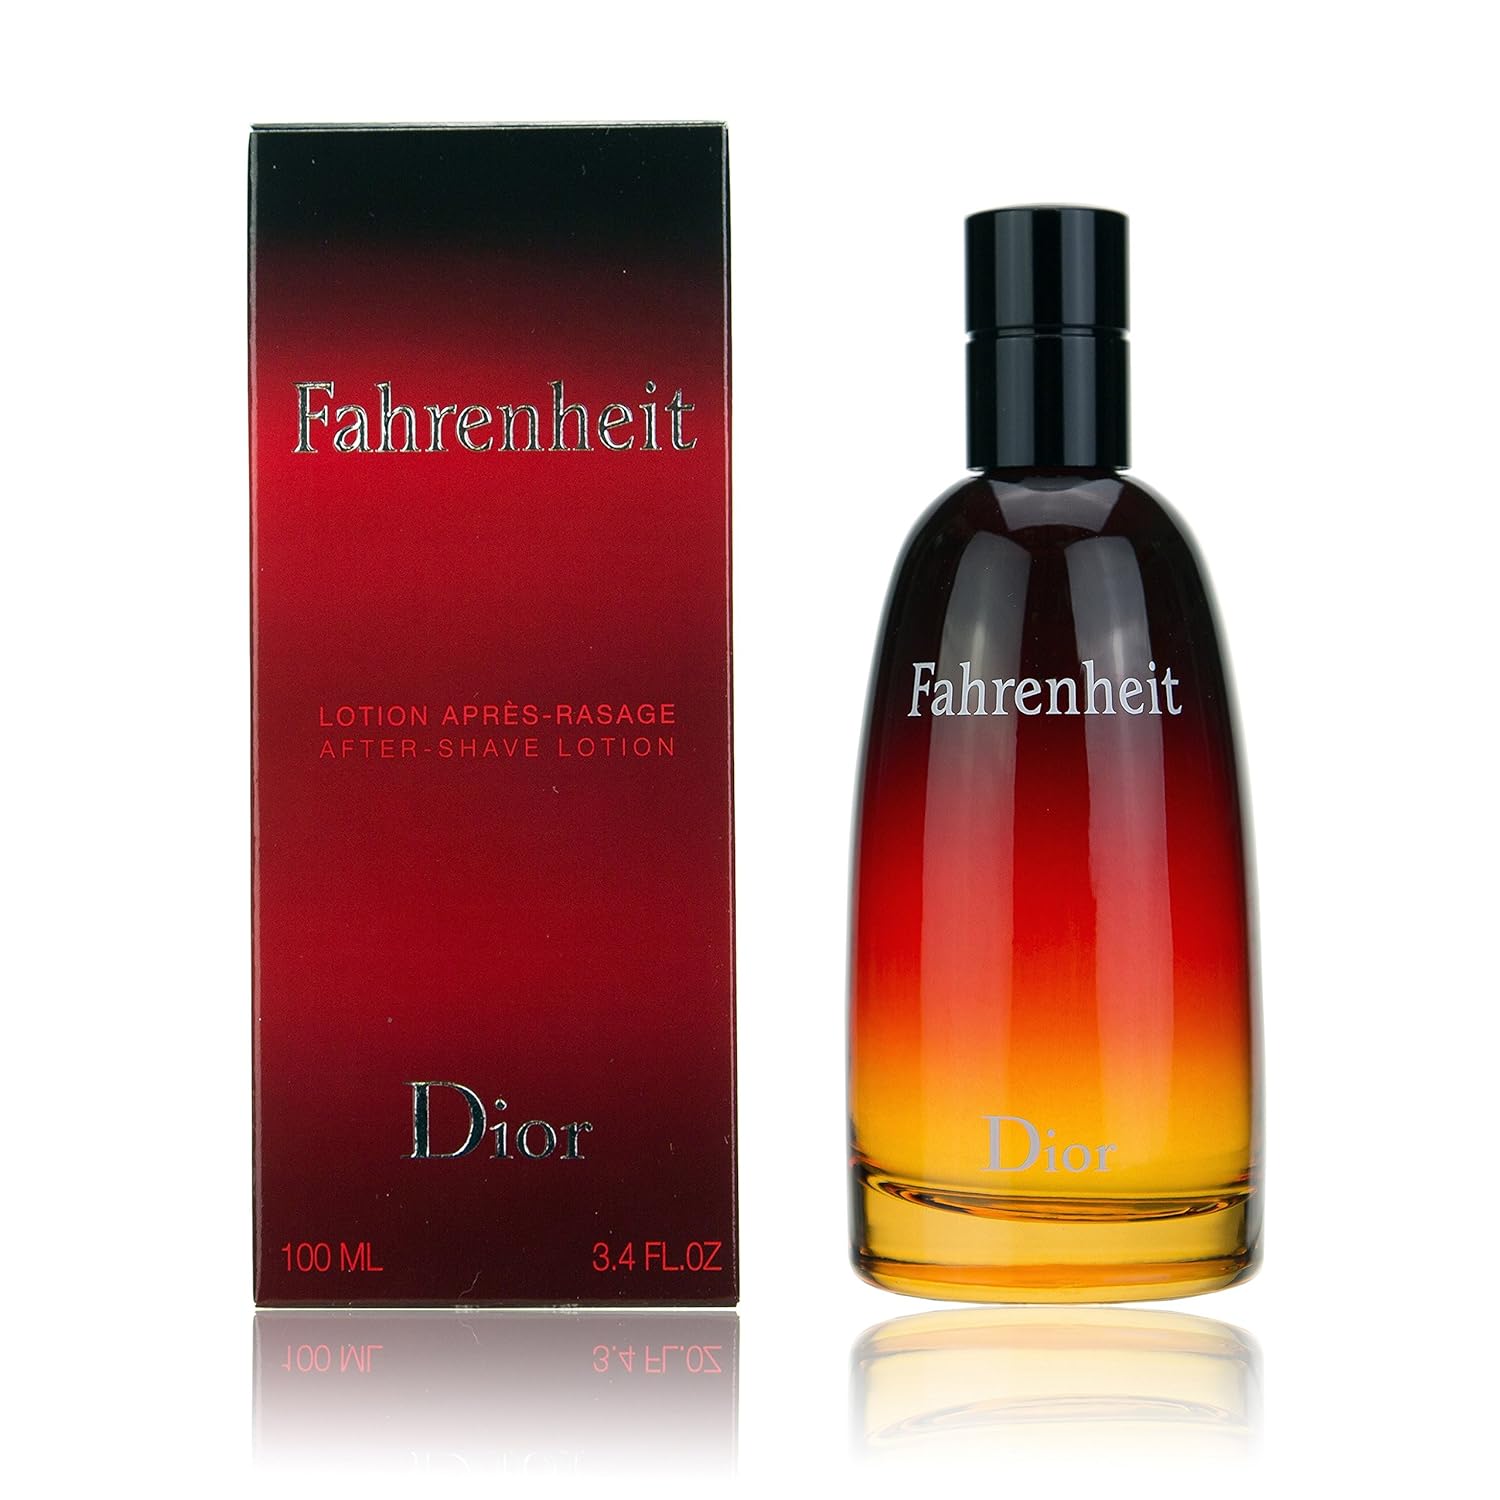 Christian Dior Fahrenheit Aftershave Lotion For Men